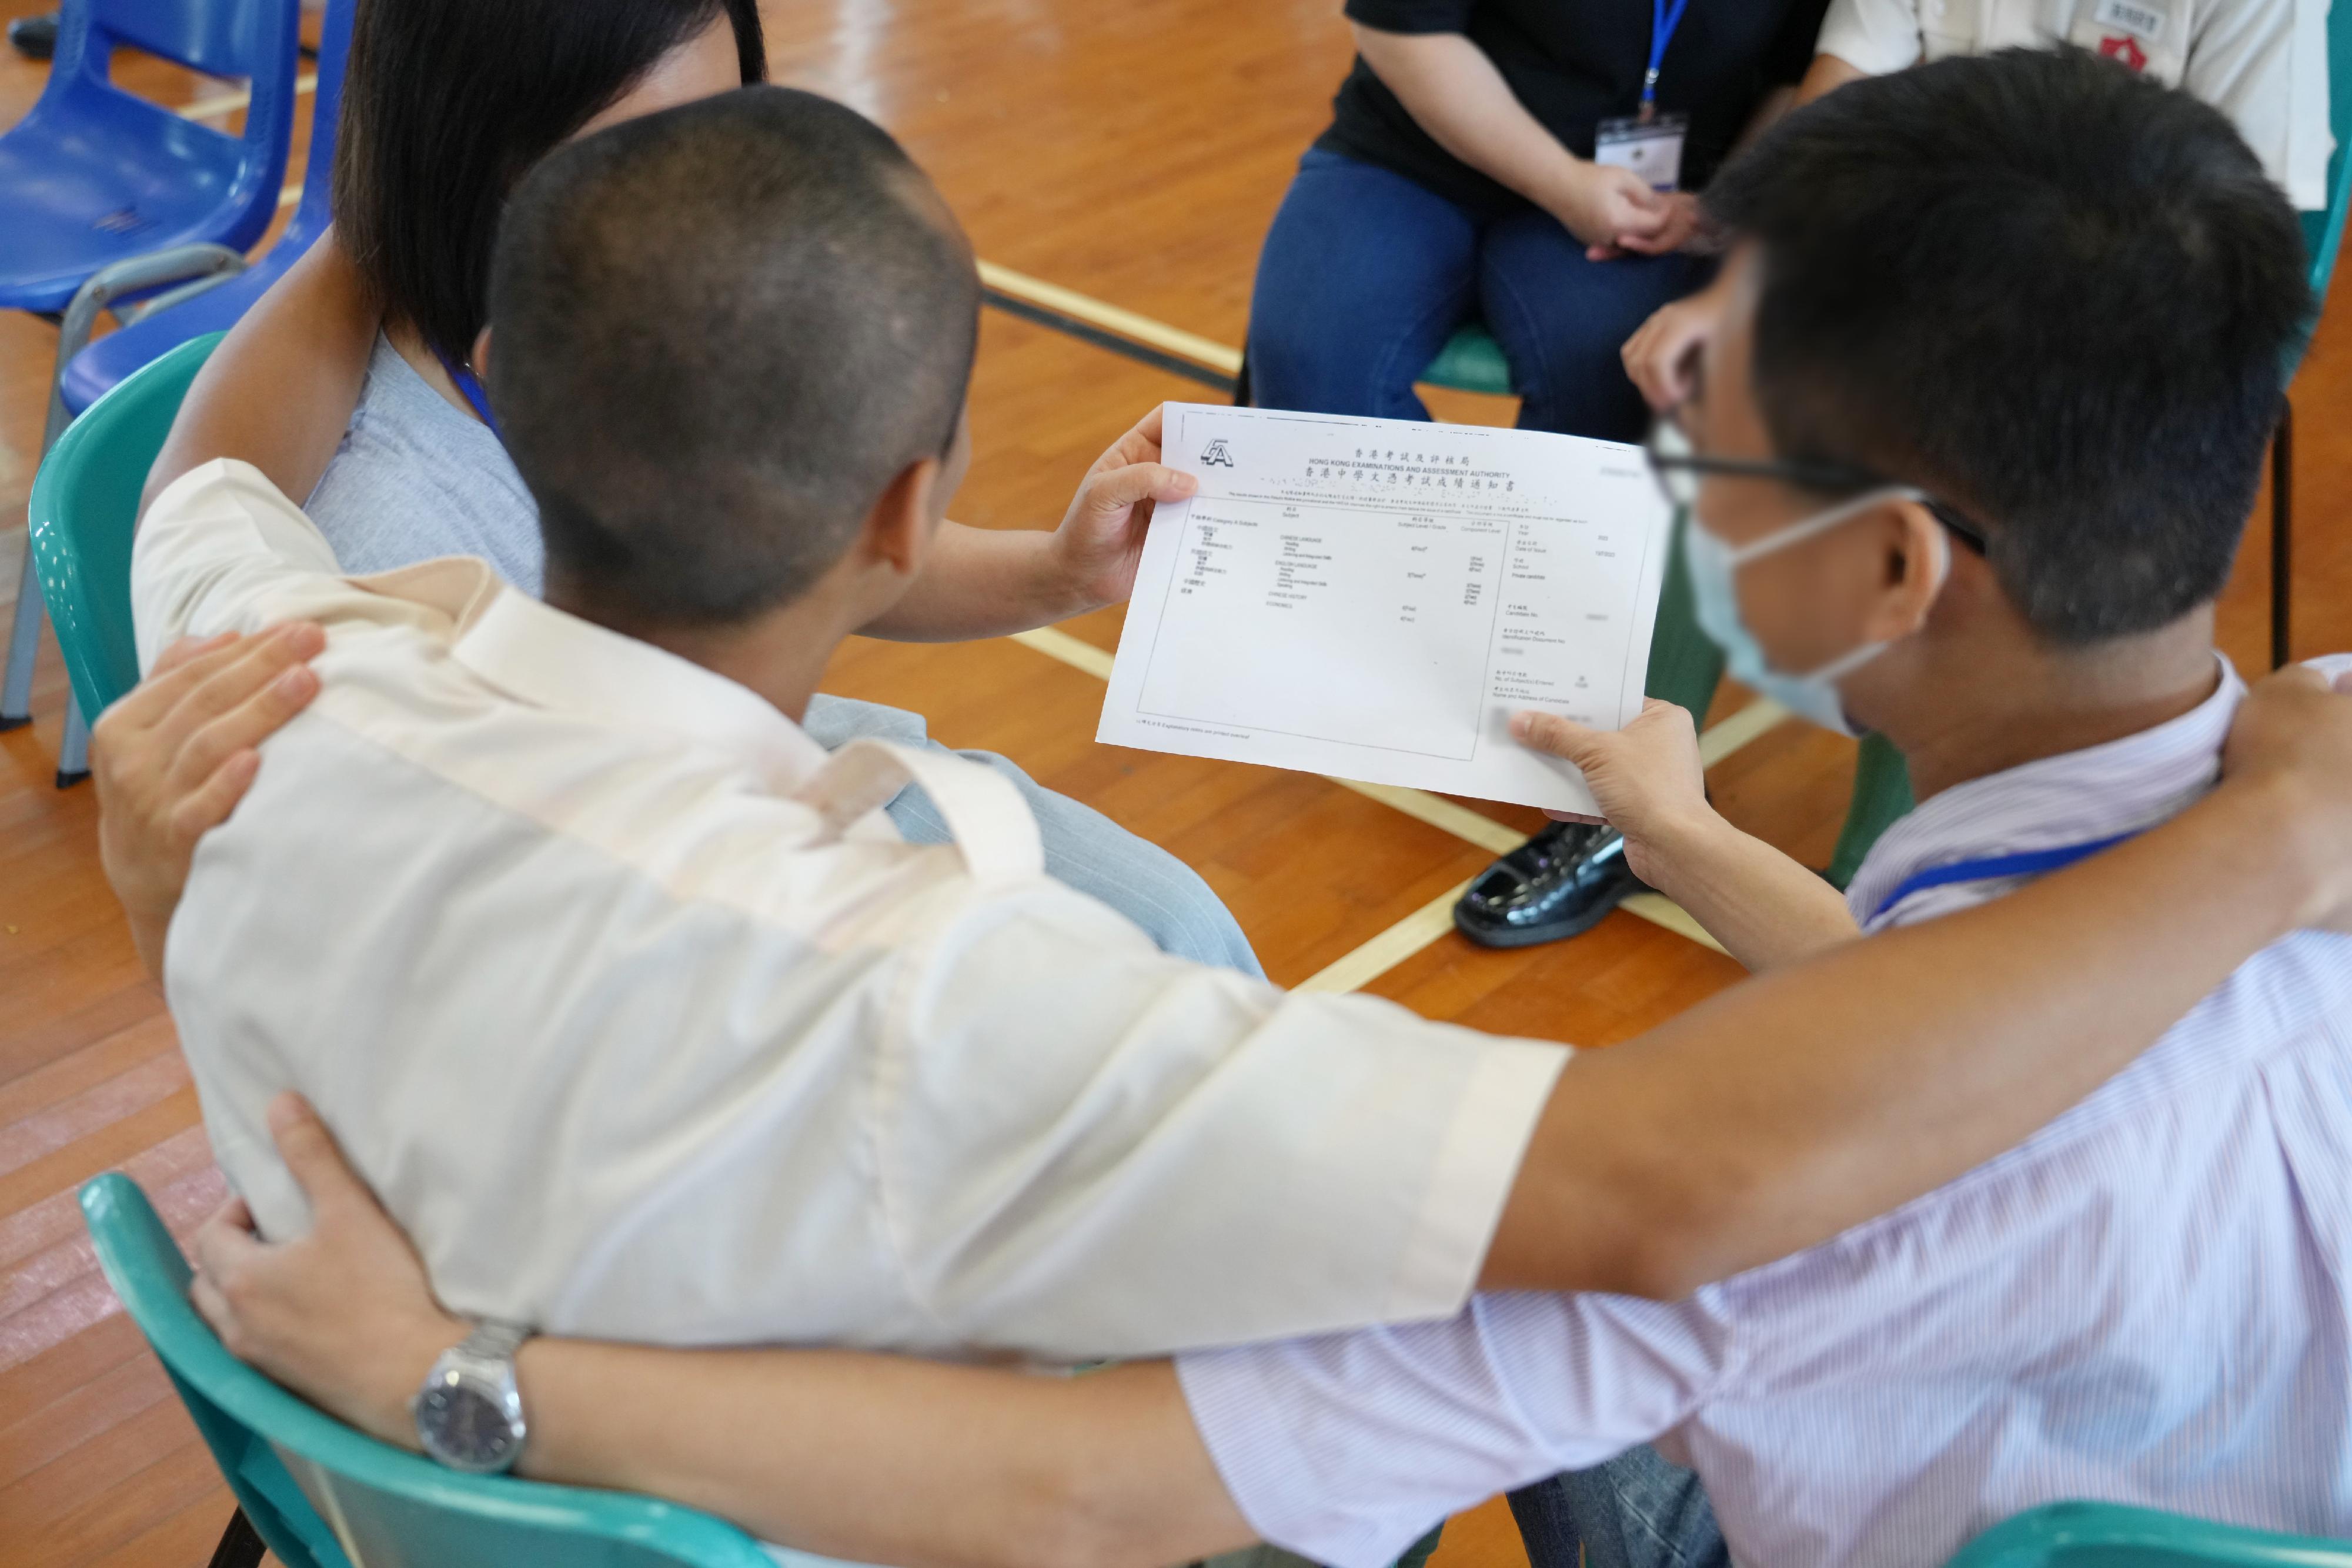 The results of the Hong Kong Diploma of Secondary Education (HKDSE) Examination were released today (July 19). Eighteen young persons in custody (PICs) enrolled in the HKDSE Examination this year. Photo shows a young PIC sharing his happiness at obtaining satisfactory HKDSE results with his family members.